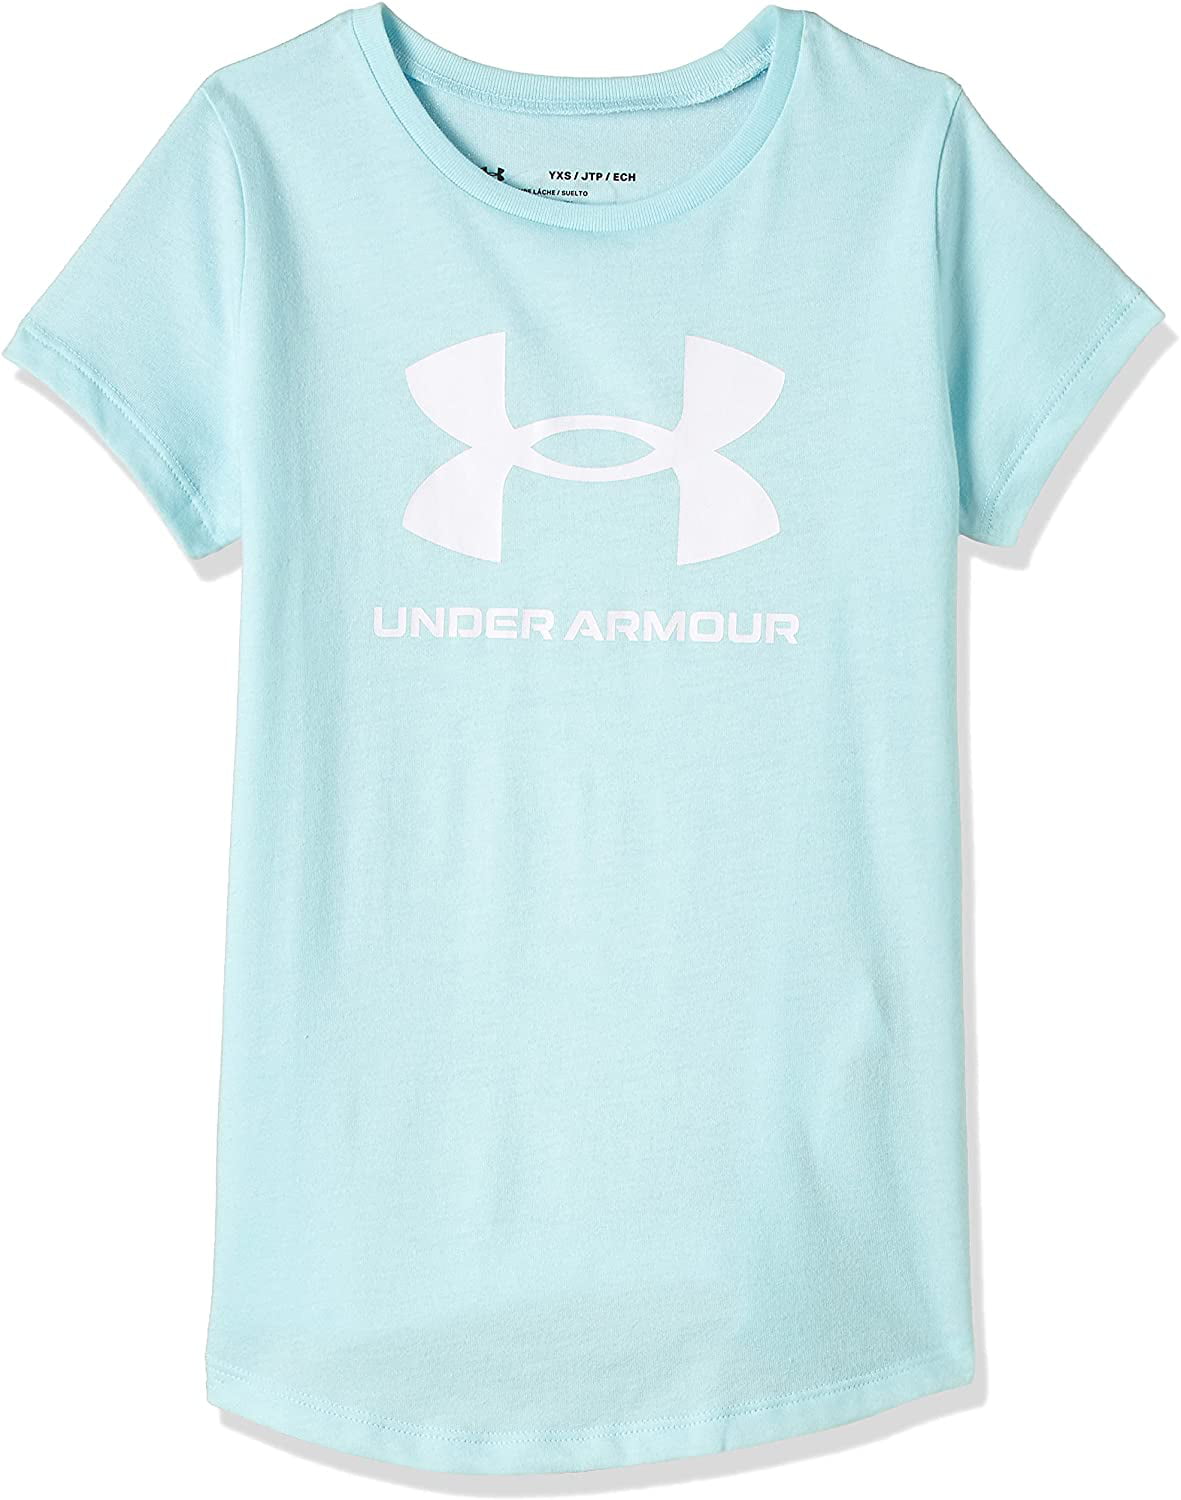 Under Armour Girls' Live Sportstyle Graphic Short-Sleeve T-Shirt 